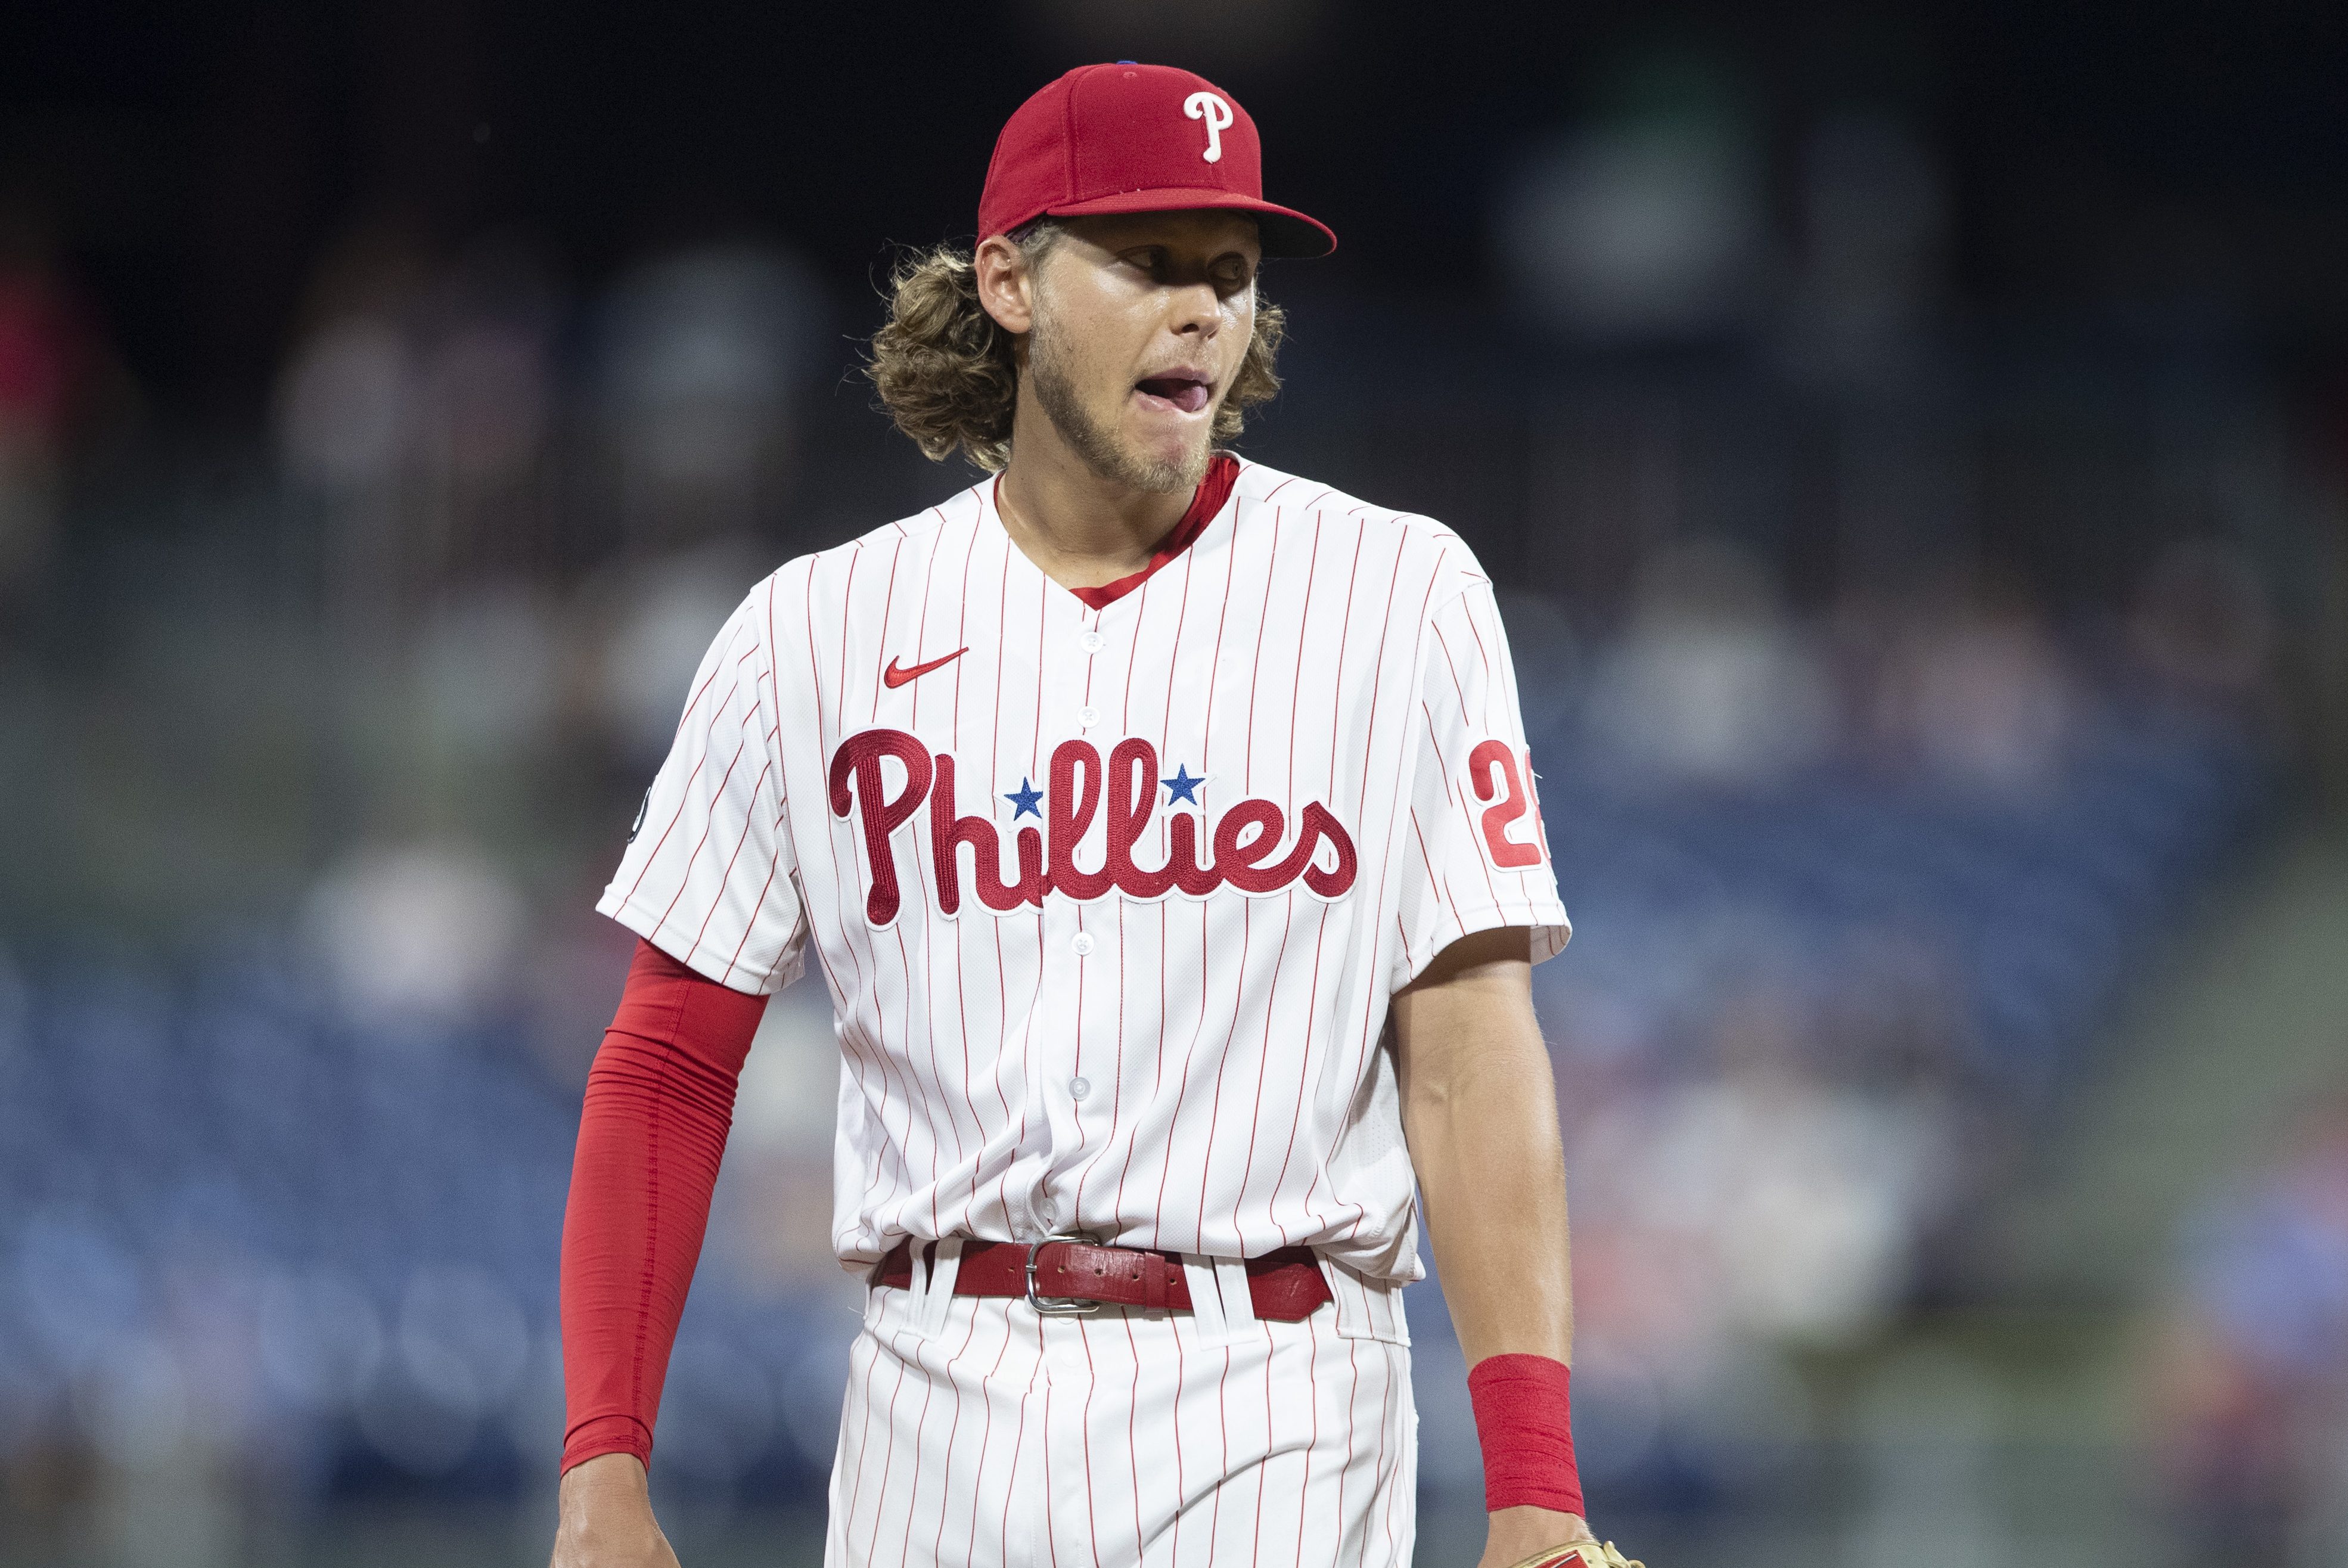 Familiar place: Former Crosscutter Alec Bohm returns to MLB Classic as  member of Phillies